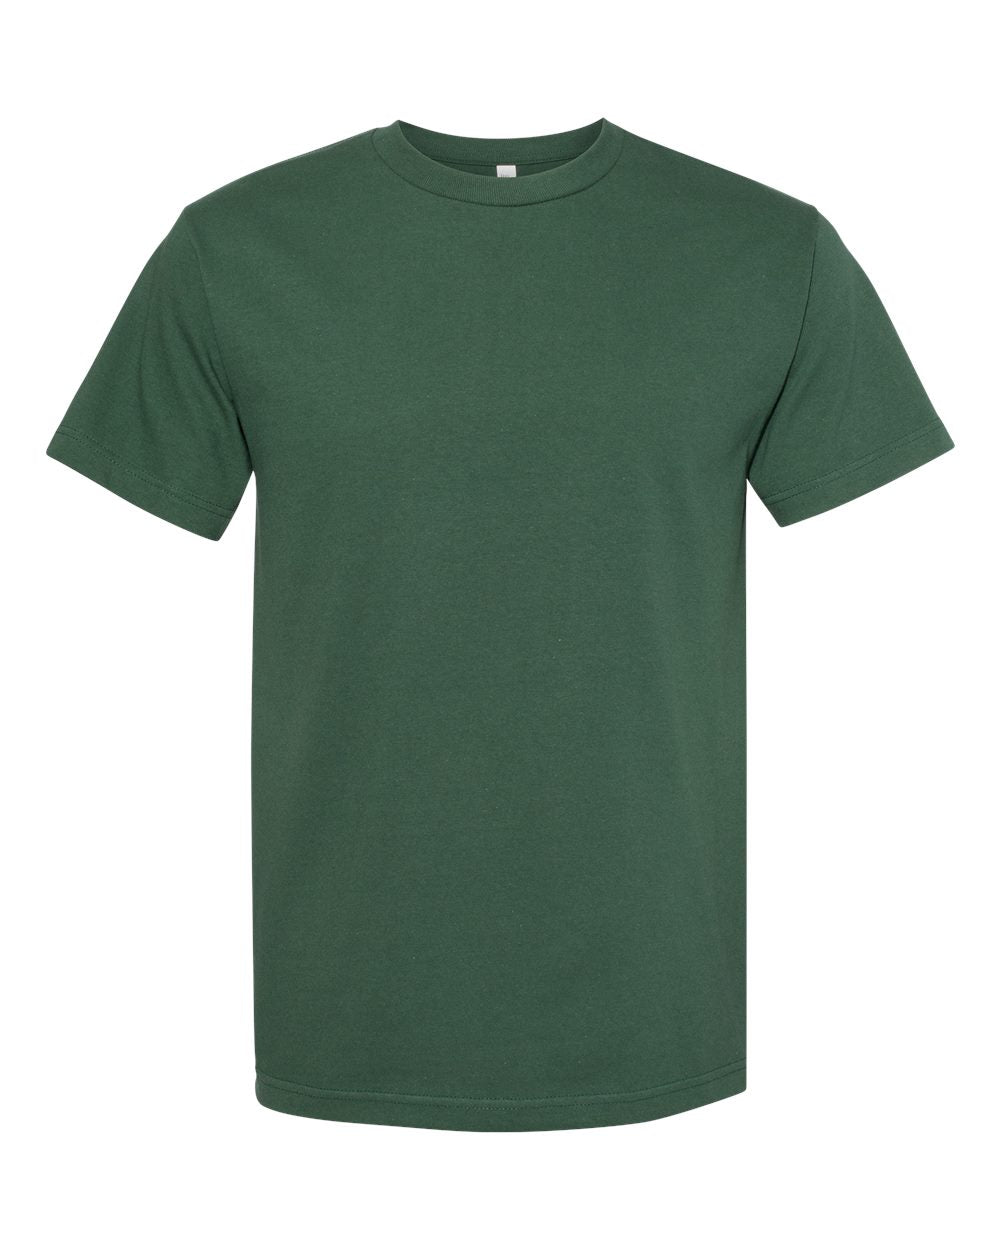 American Apparel Unisex Heavyweight Cotton Tee 1301 #color_Forest